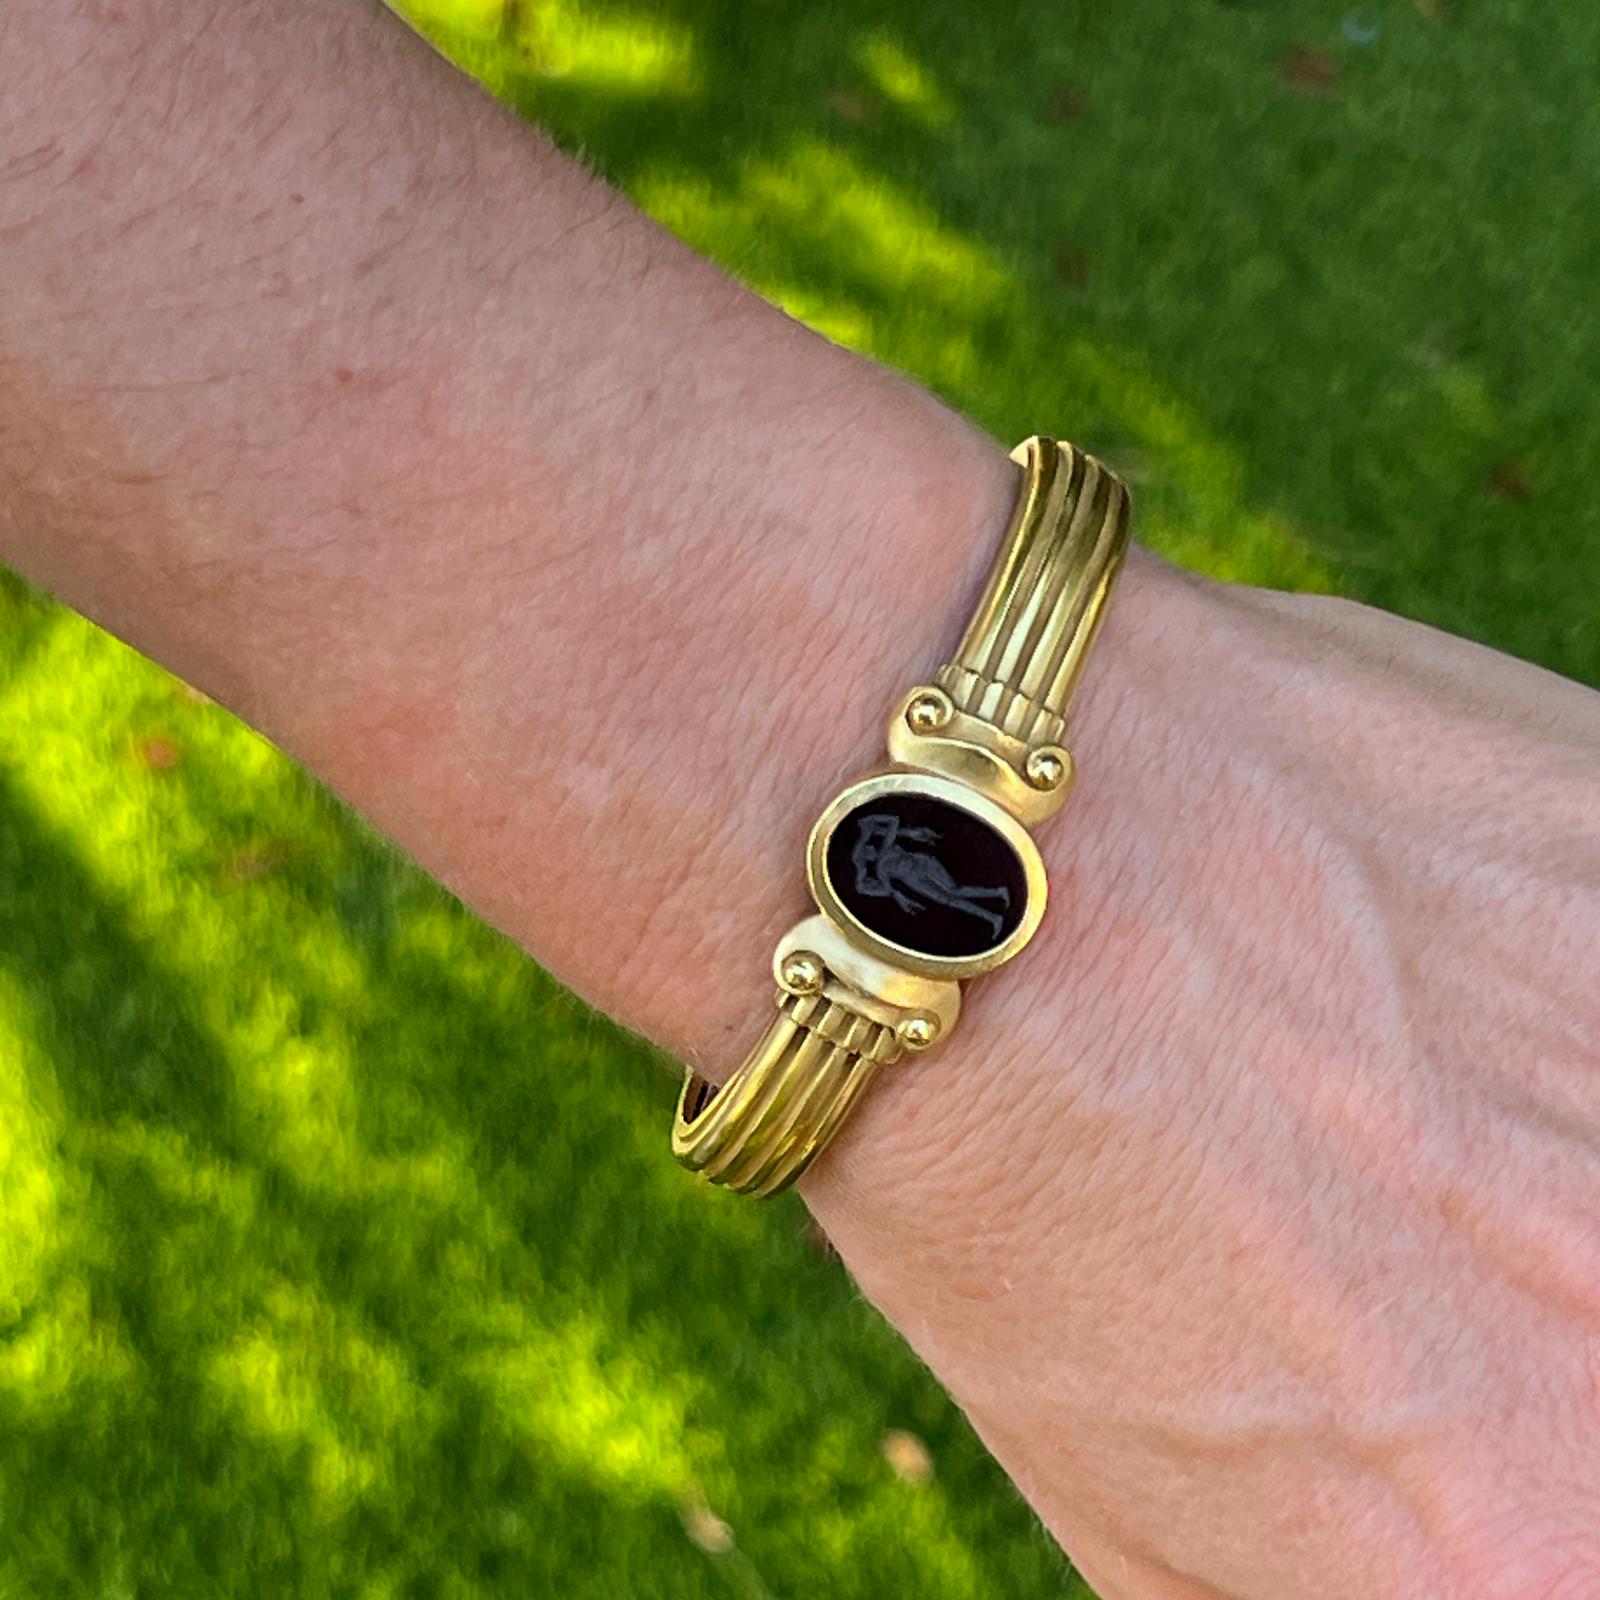 Beautiful black intaglio cuff bracelet by designer Kieselstein-Cord handcrafted in 18 karat yellow gold. The ribbed cuff features an oval onyx black ancient greek intaglio, and hinged ends for easy wear. The cuff measures 10-15mm in width, and 2.25